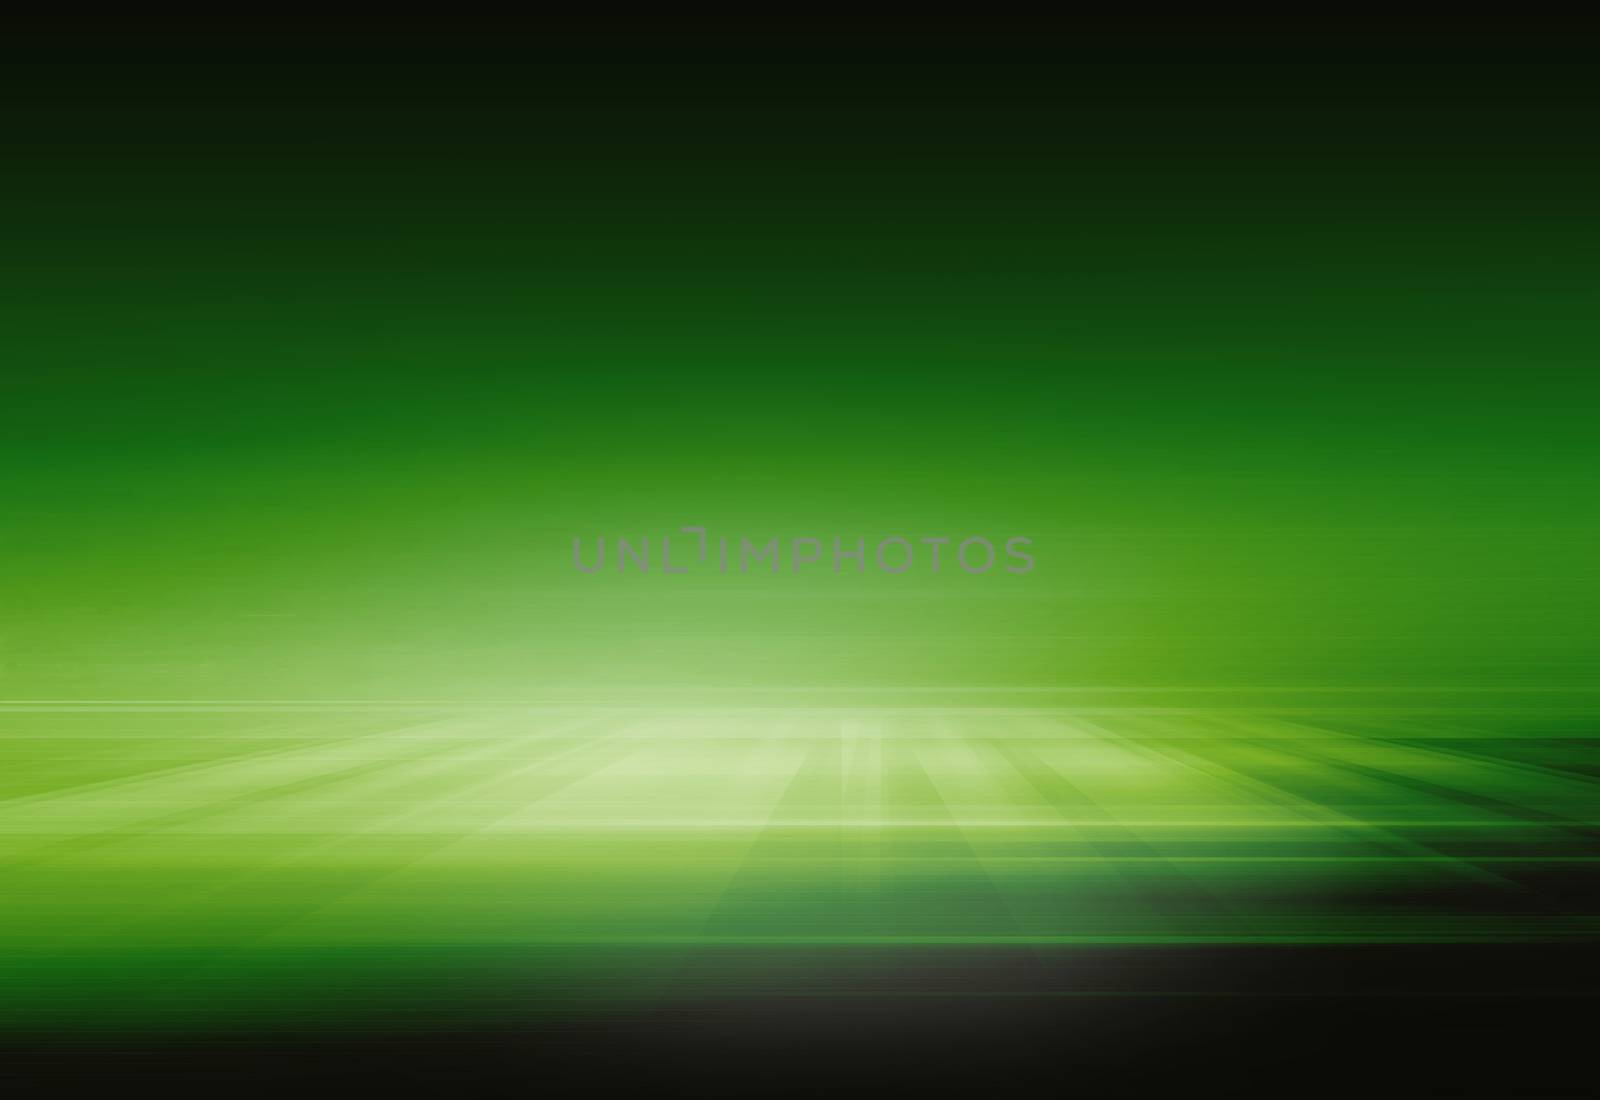 Abstract green background, suitable for products advertising. 3d Illustration